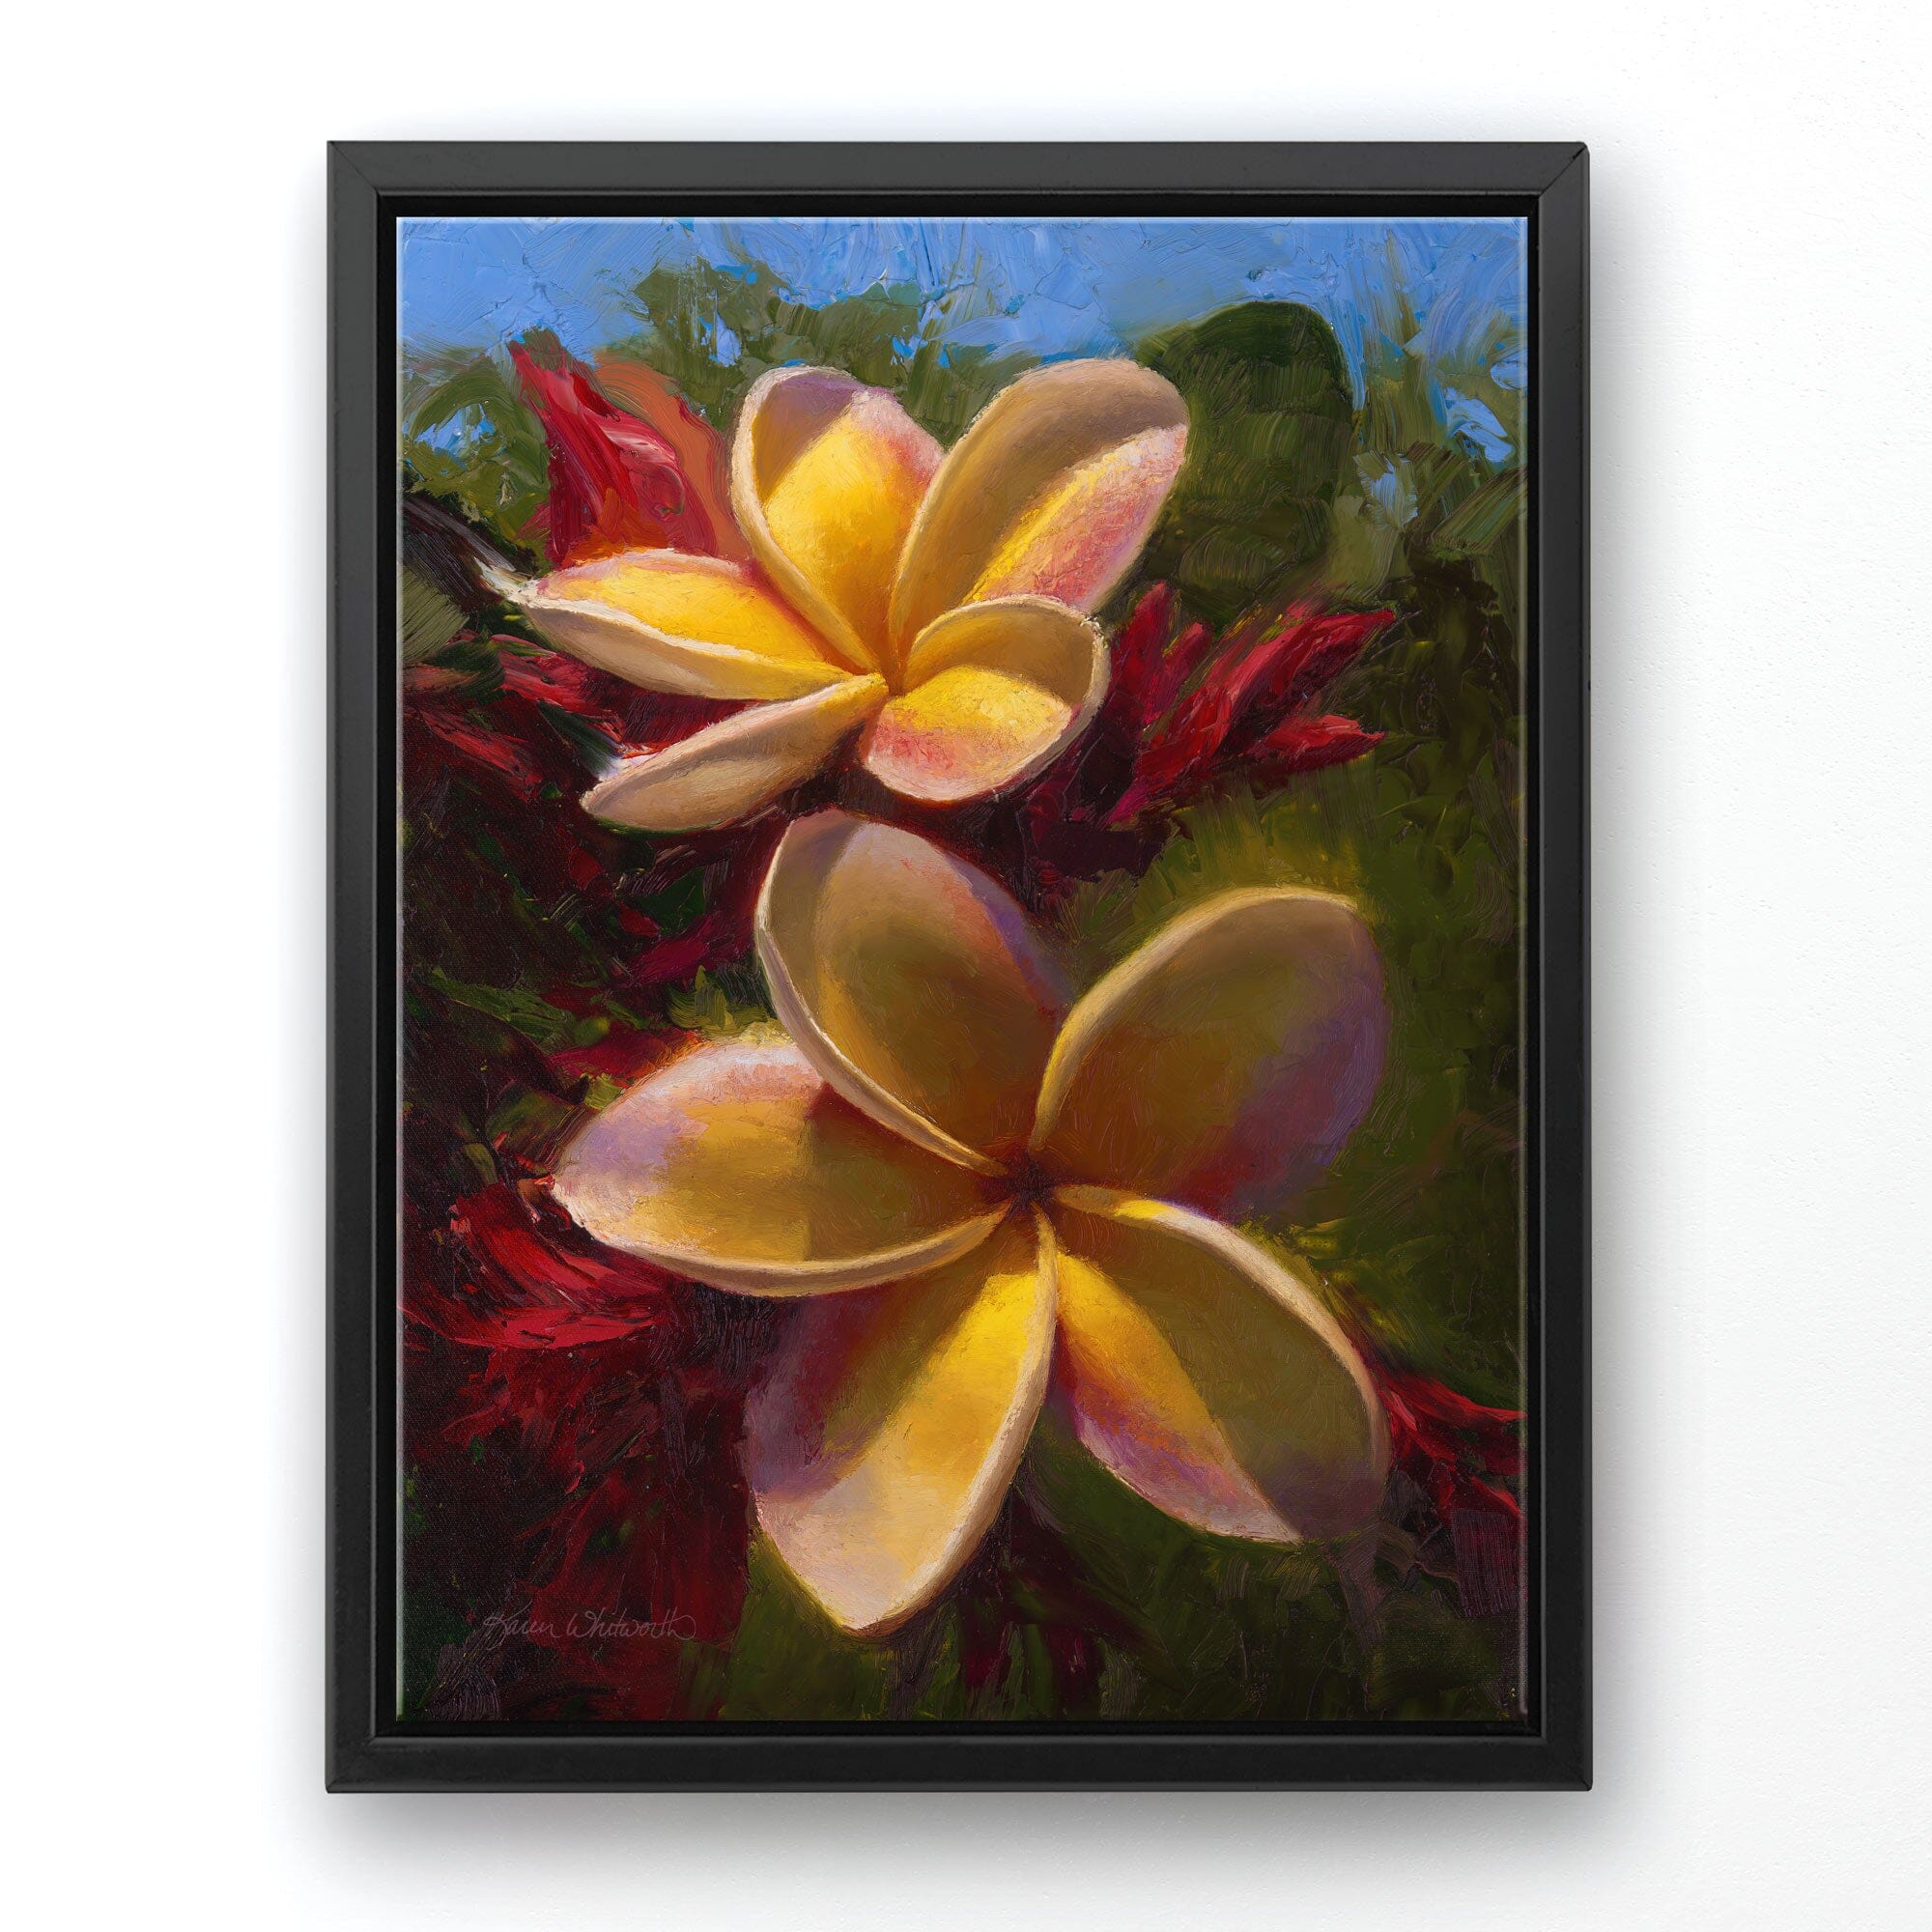 Hawaiian canvas art of tropical plumeria flowers in a floral painting by artist Karen Whitworth. The artwork is in a black picture frame and hanging on a white wall. 